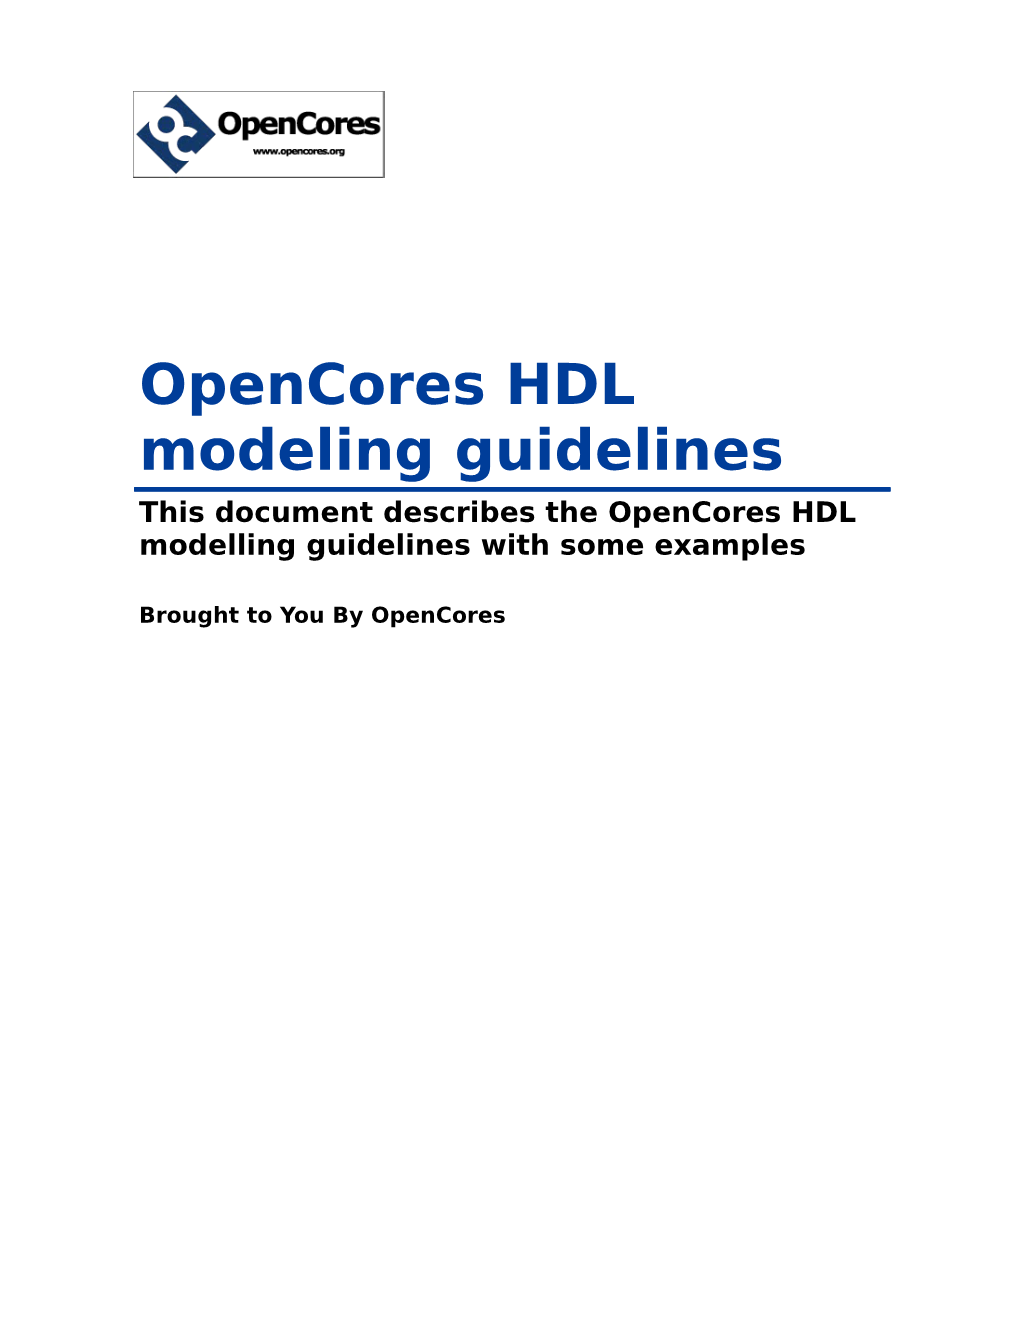 Opencores HDL Modeling Guidelines This Document Describes the Opencores HDL Modelling Guidelines with Some Examples